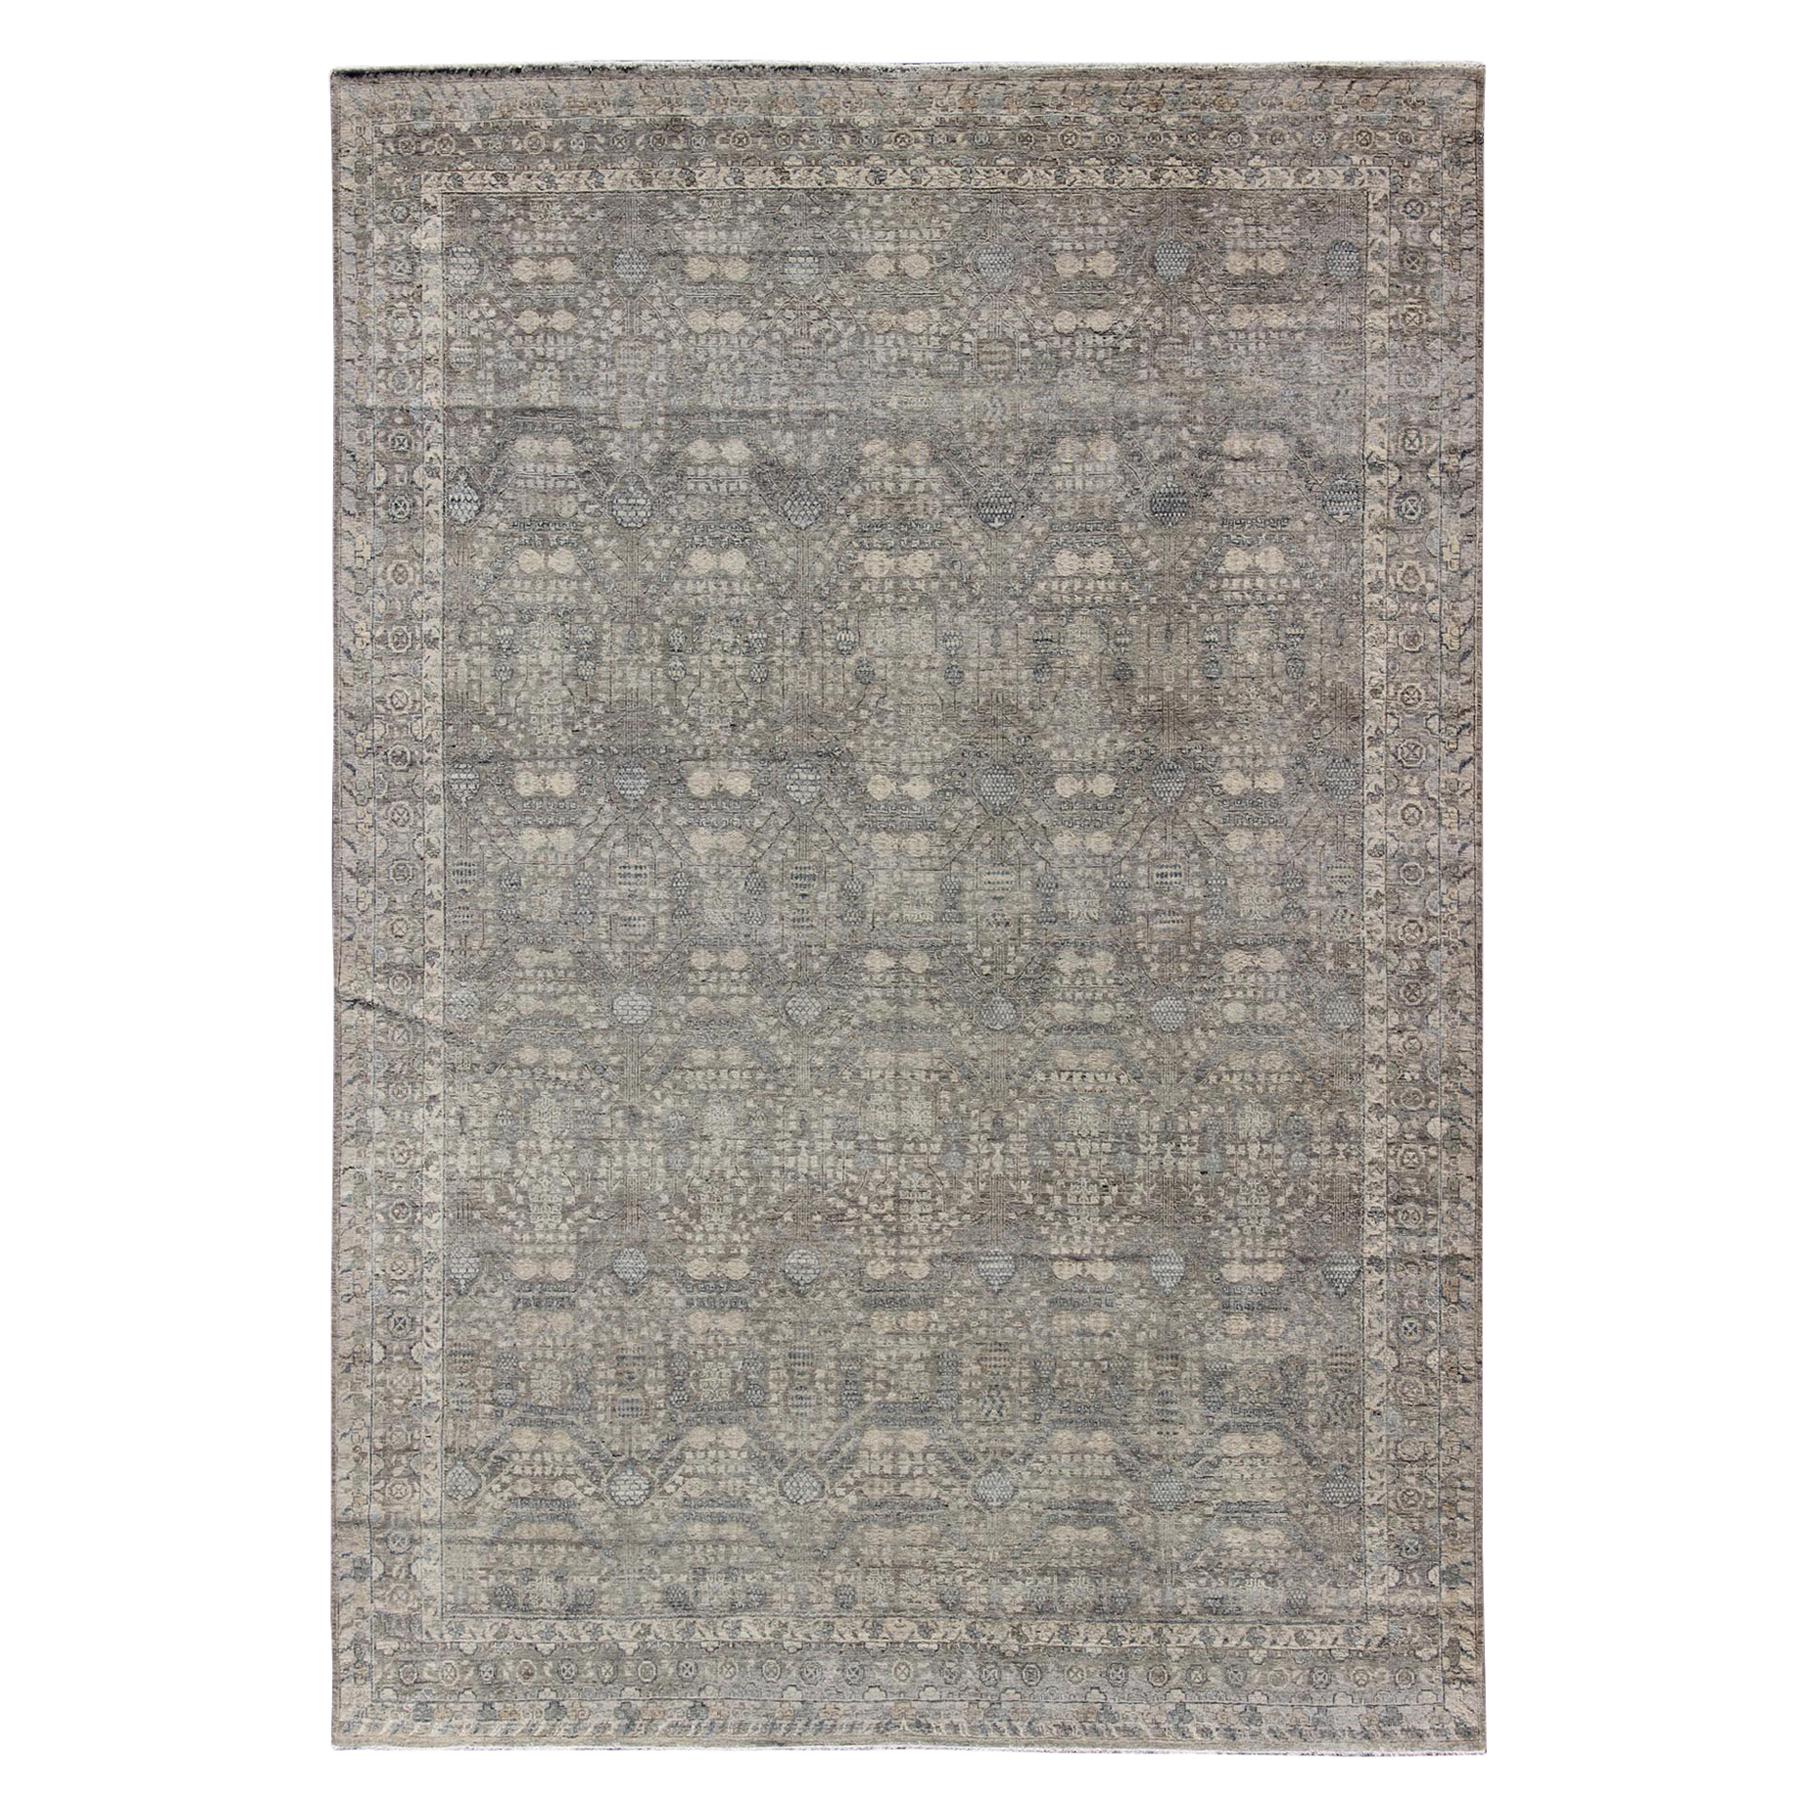 Modern Fine Weave Distressed Tabriz Rug in Taupe, Gray, Blue and Neutral Tones 